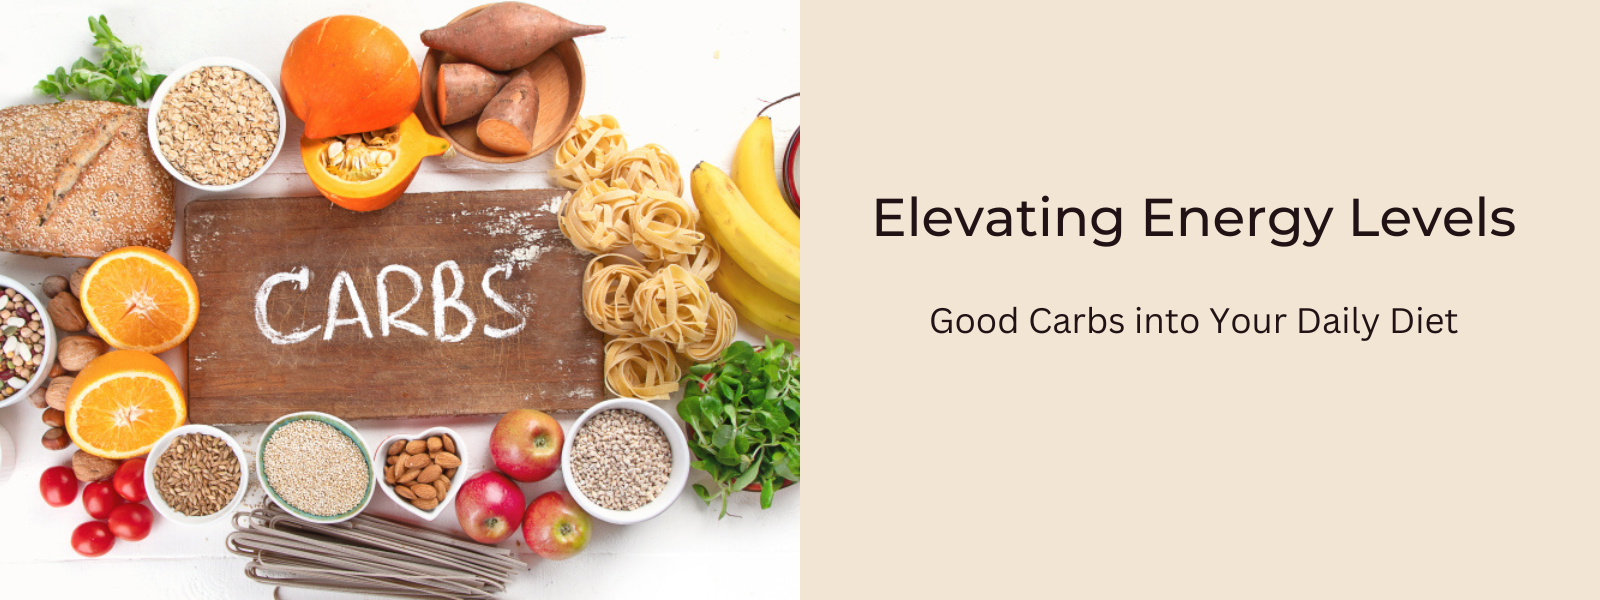 Elevating Energy Levels: The Vital Health Benefits of Incorporating Good Carbs into Your Daily Diet